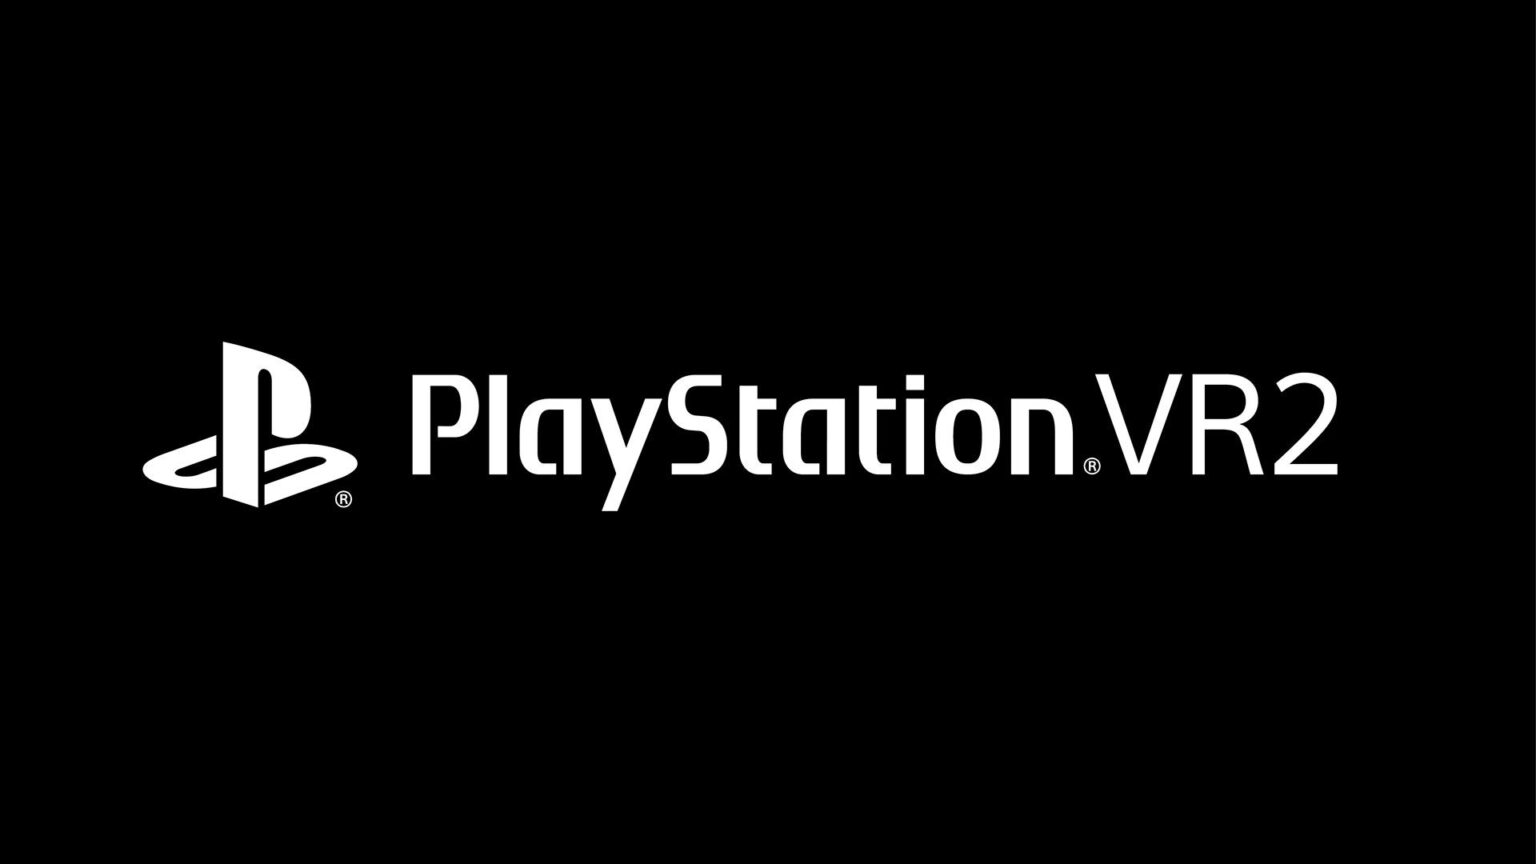 PlayStation VR 2 Announced Ahead of CES 2022